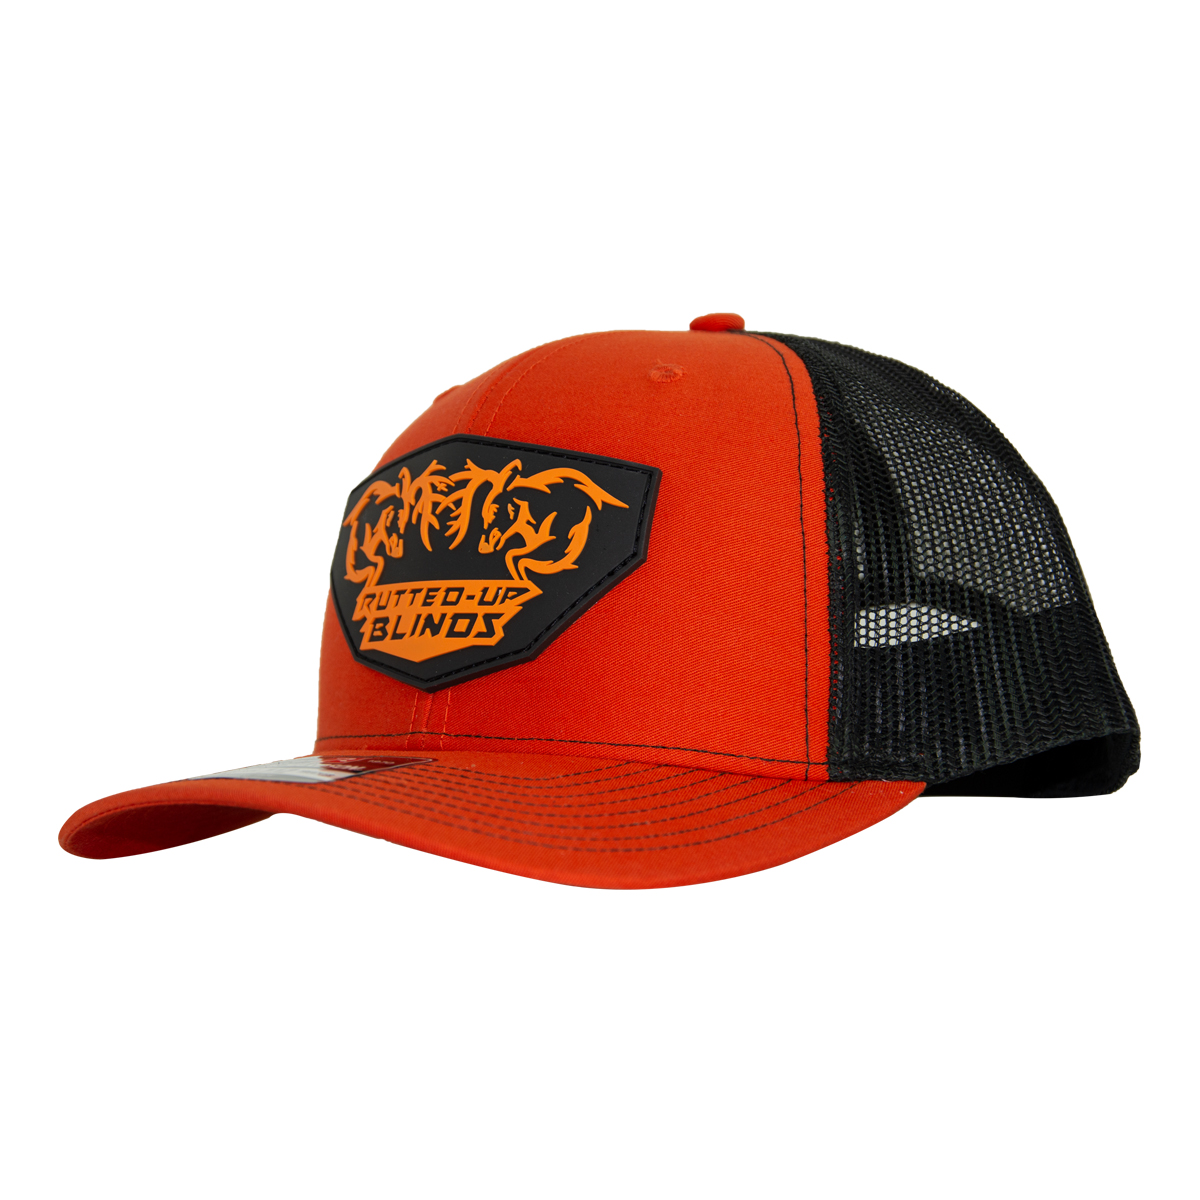 Rutted-Up Grey Red Front Black Back Black Orange Patch Hat | Rutted-Up ...